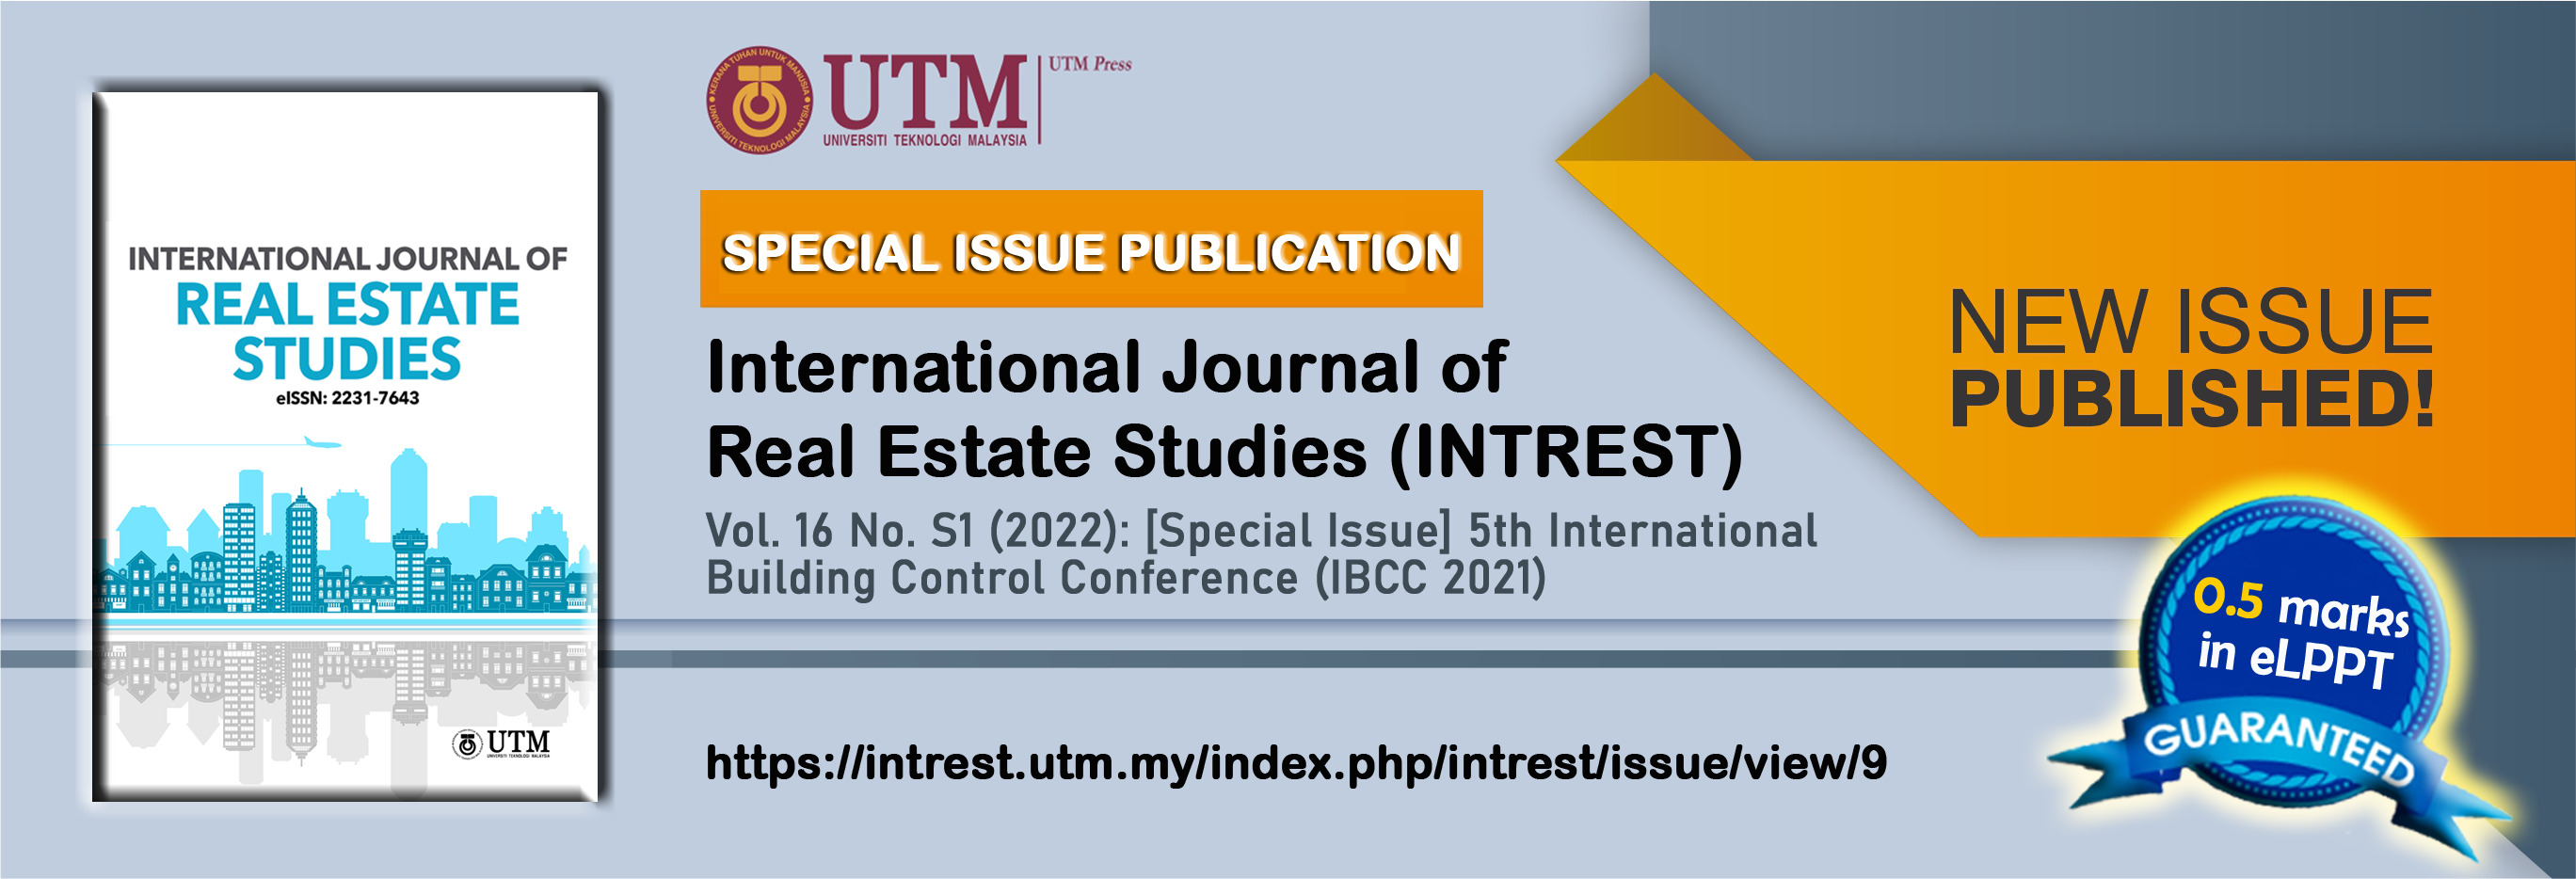 					View Vol. 16 No. S1 (2022): [Special Issue] 5th International Building Control Conference (IBCC 2021)
				